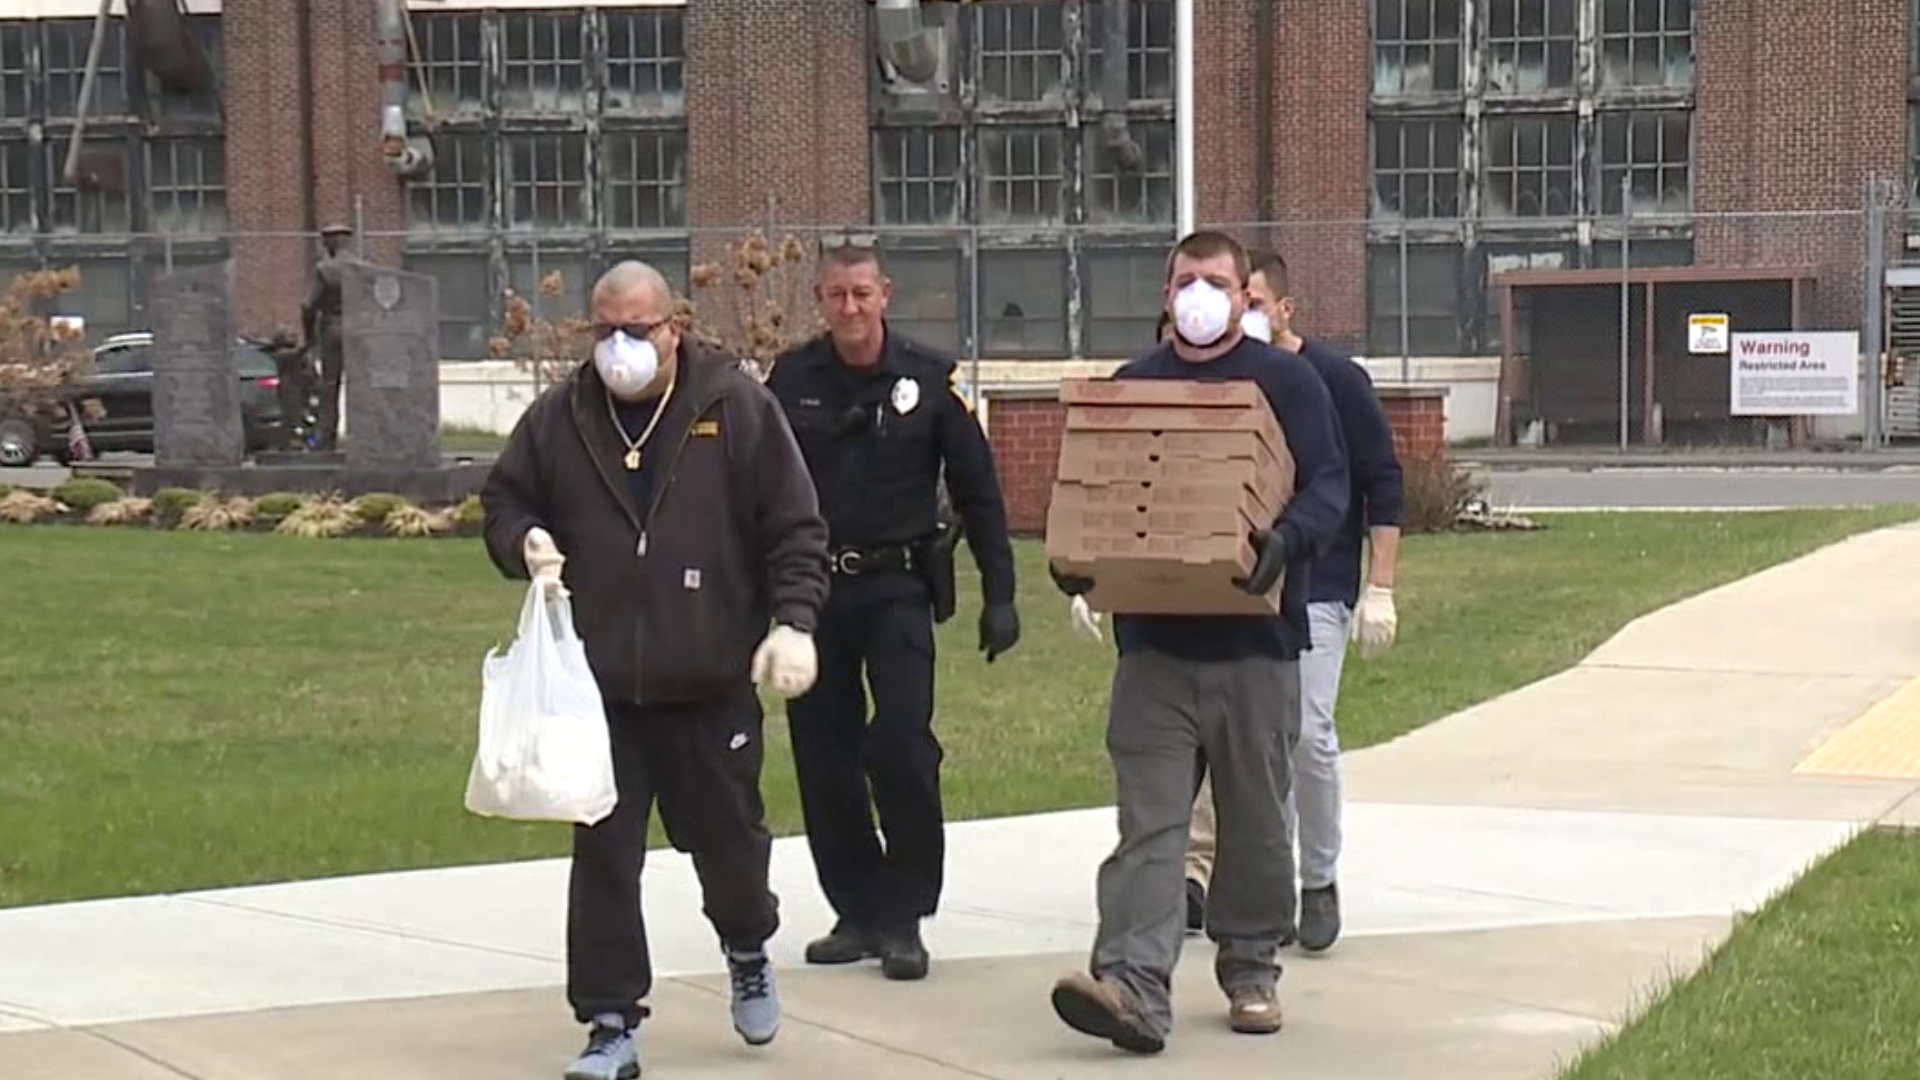 Two Lackawanna County businesses delivered lunch to hospitals, police departments.